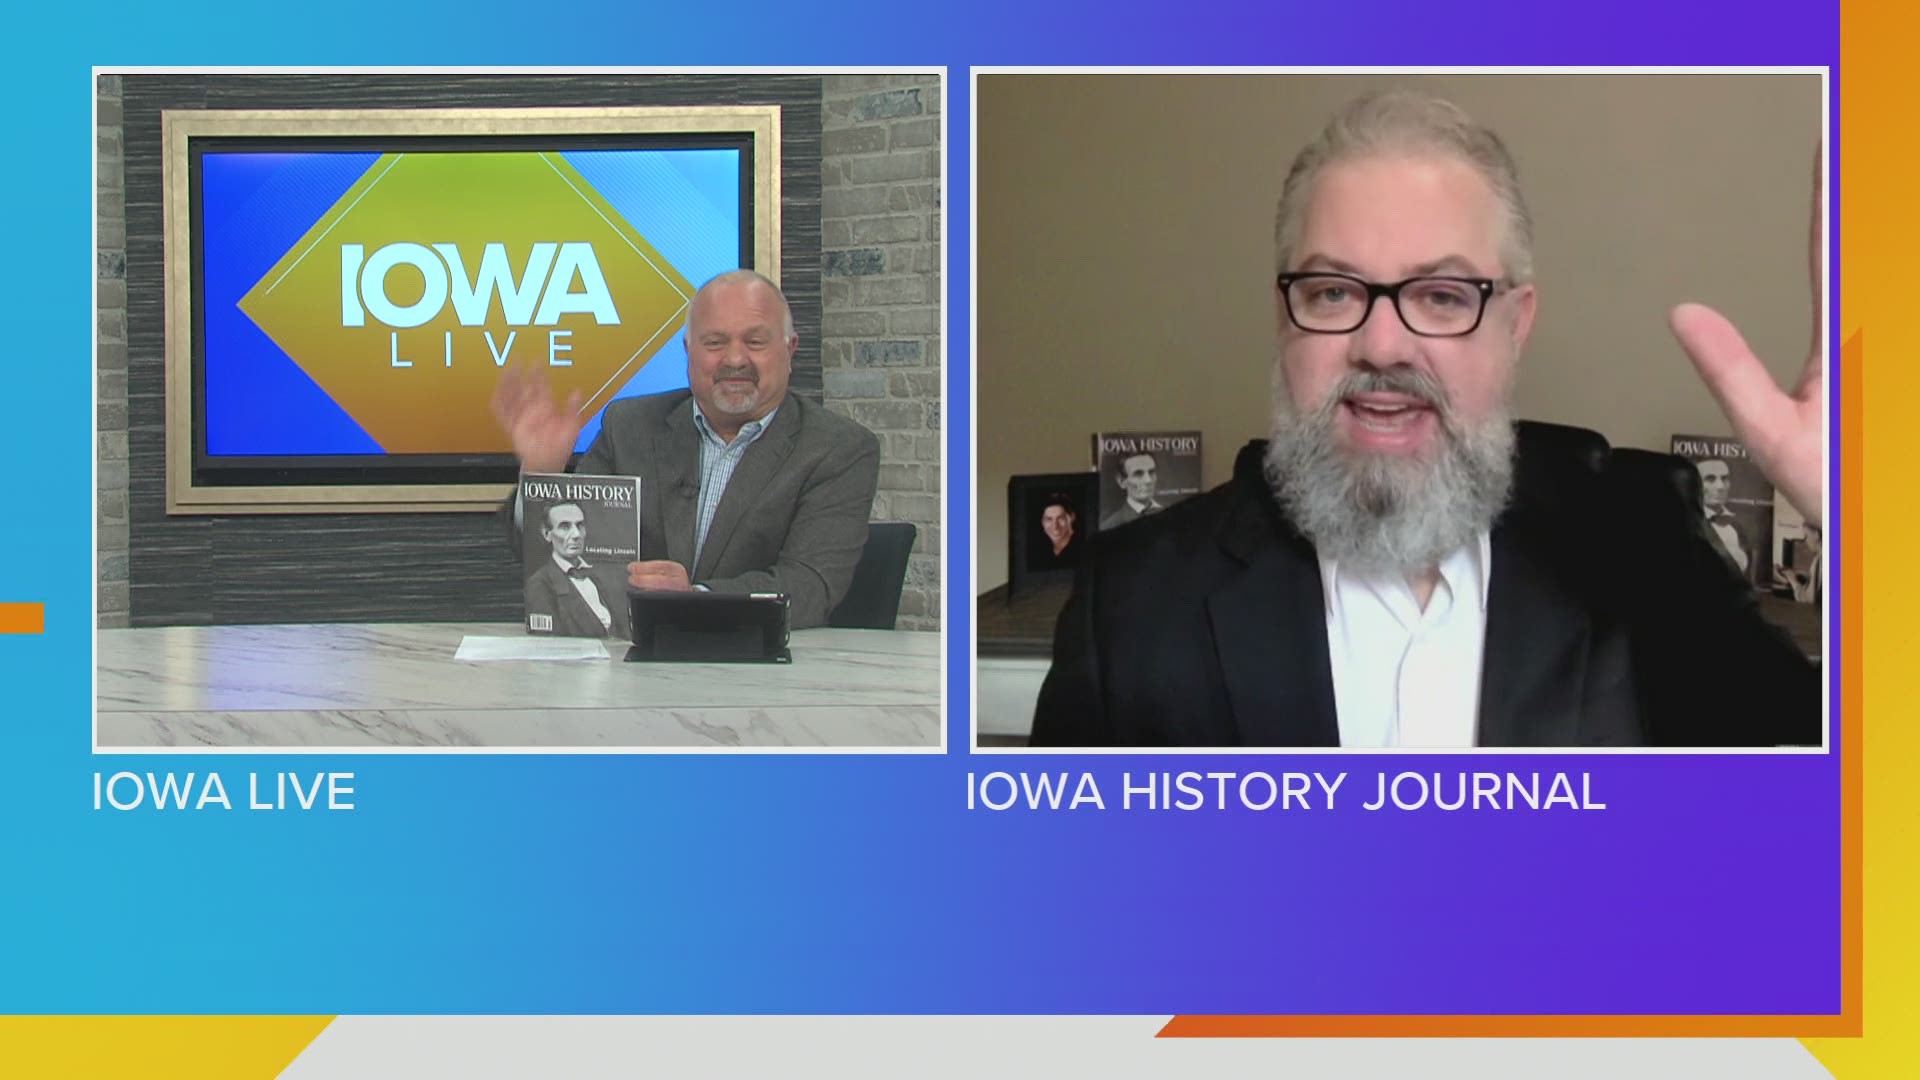 Michael Swanger, Publisher of the Iowa History Journal gives us a peek of what is inside the latest issue.